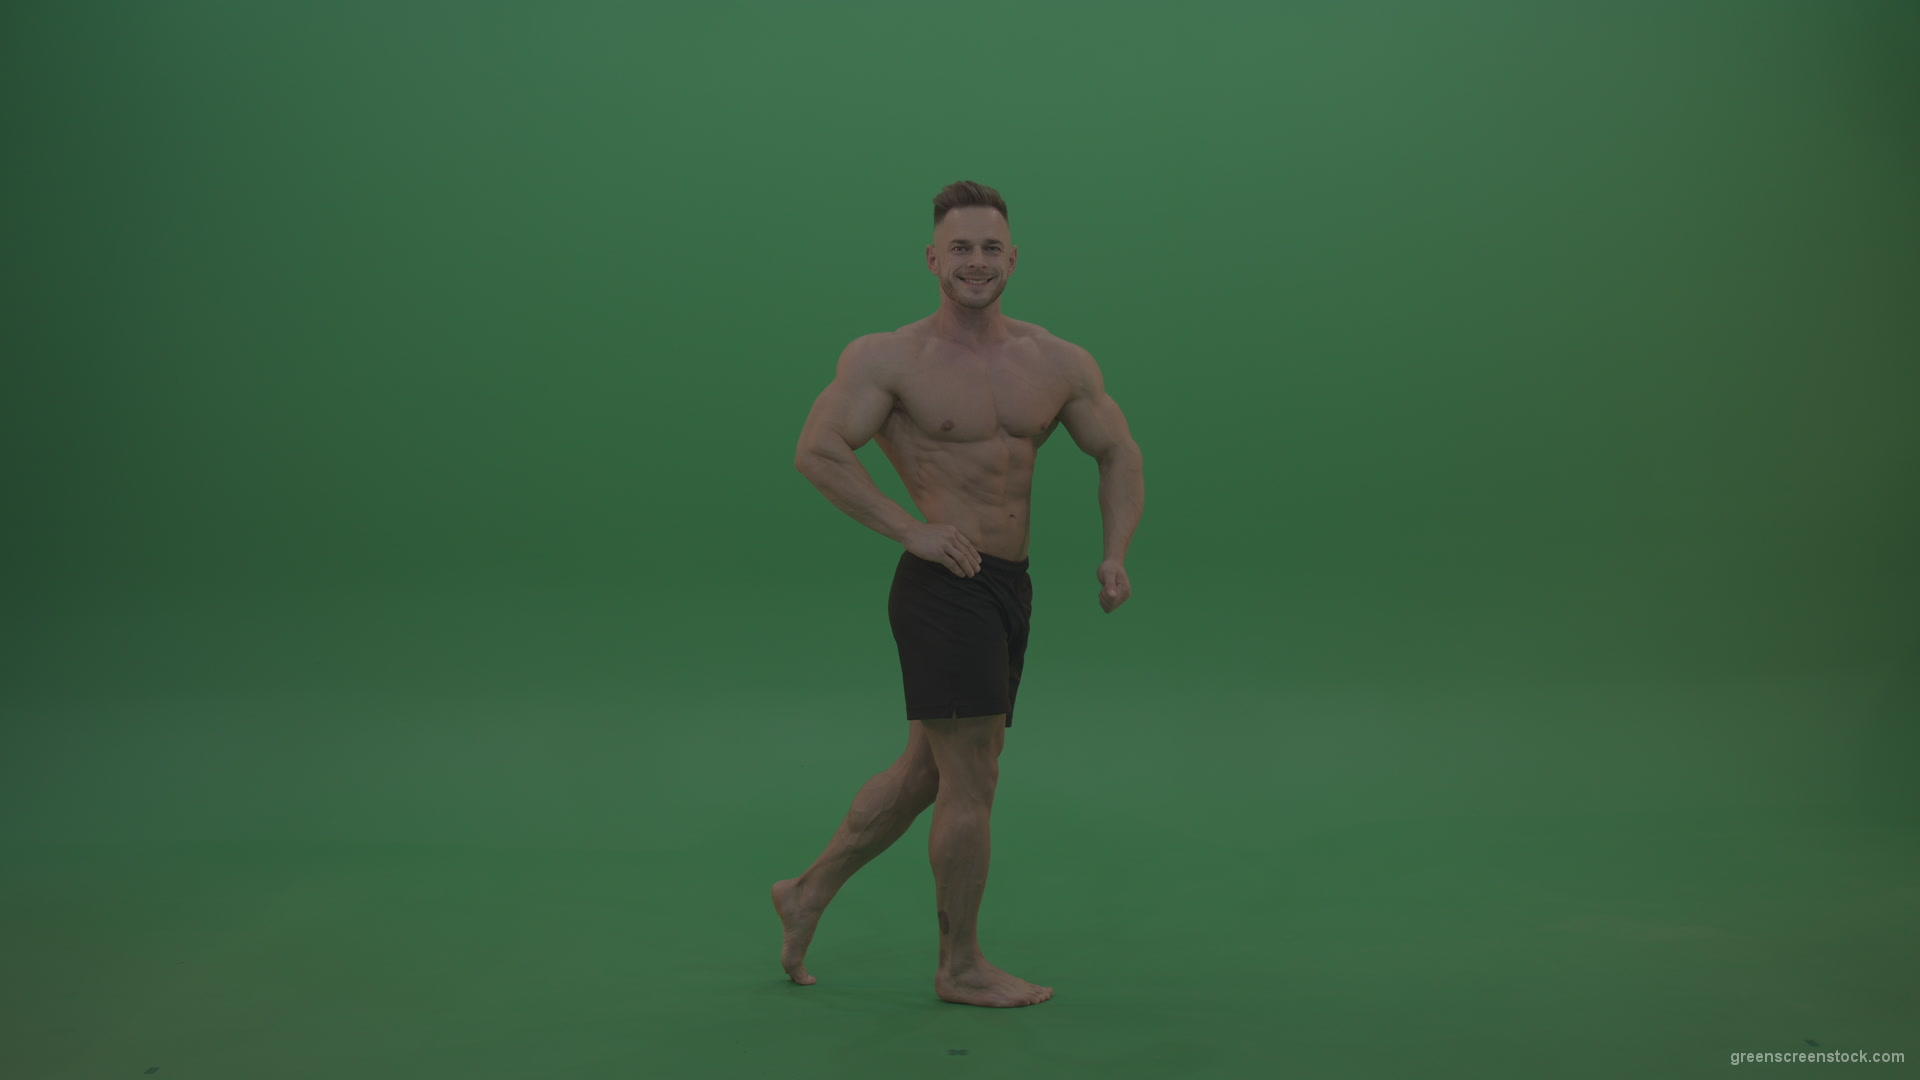 Young_Bodybuilding_Athlete_Showing_Rear_Side_And_Front_Biceps_Poses_Technique_On_Green_Screen_Wall_Background_007 Green Screen Stock